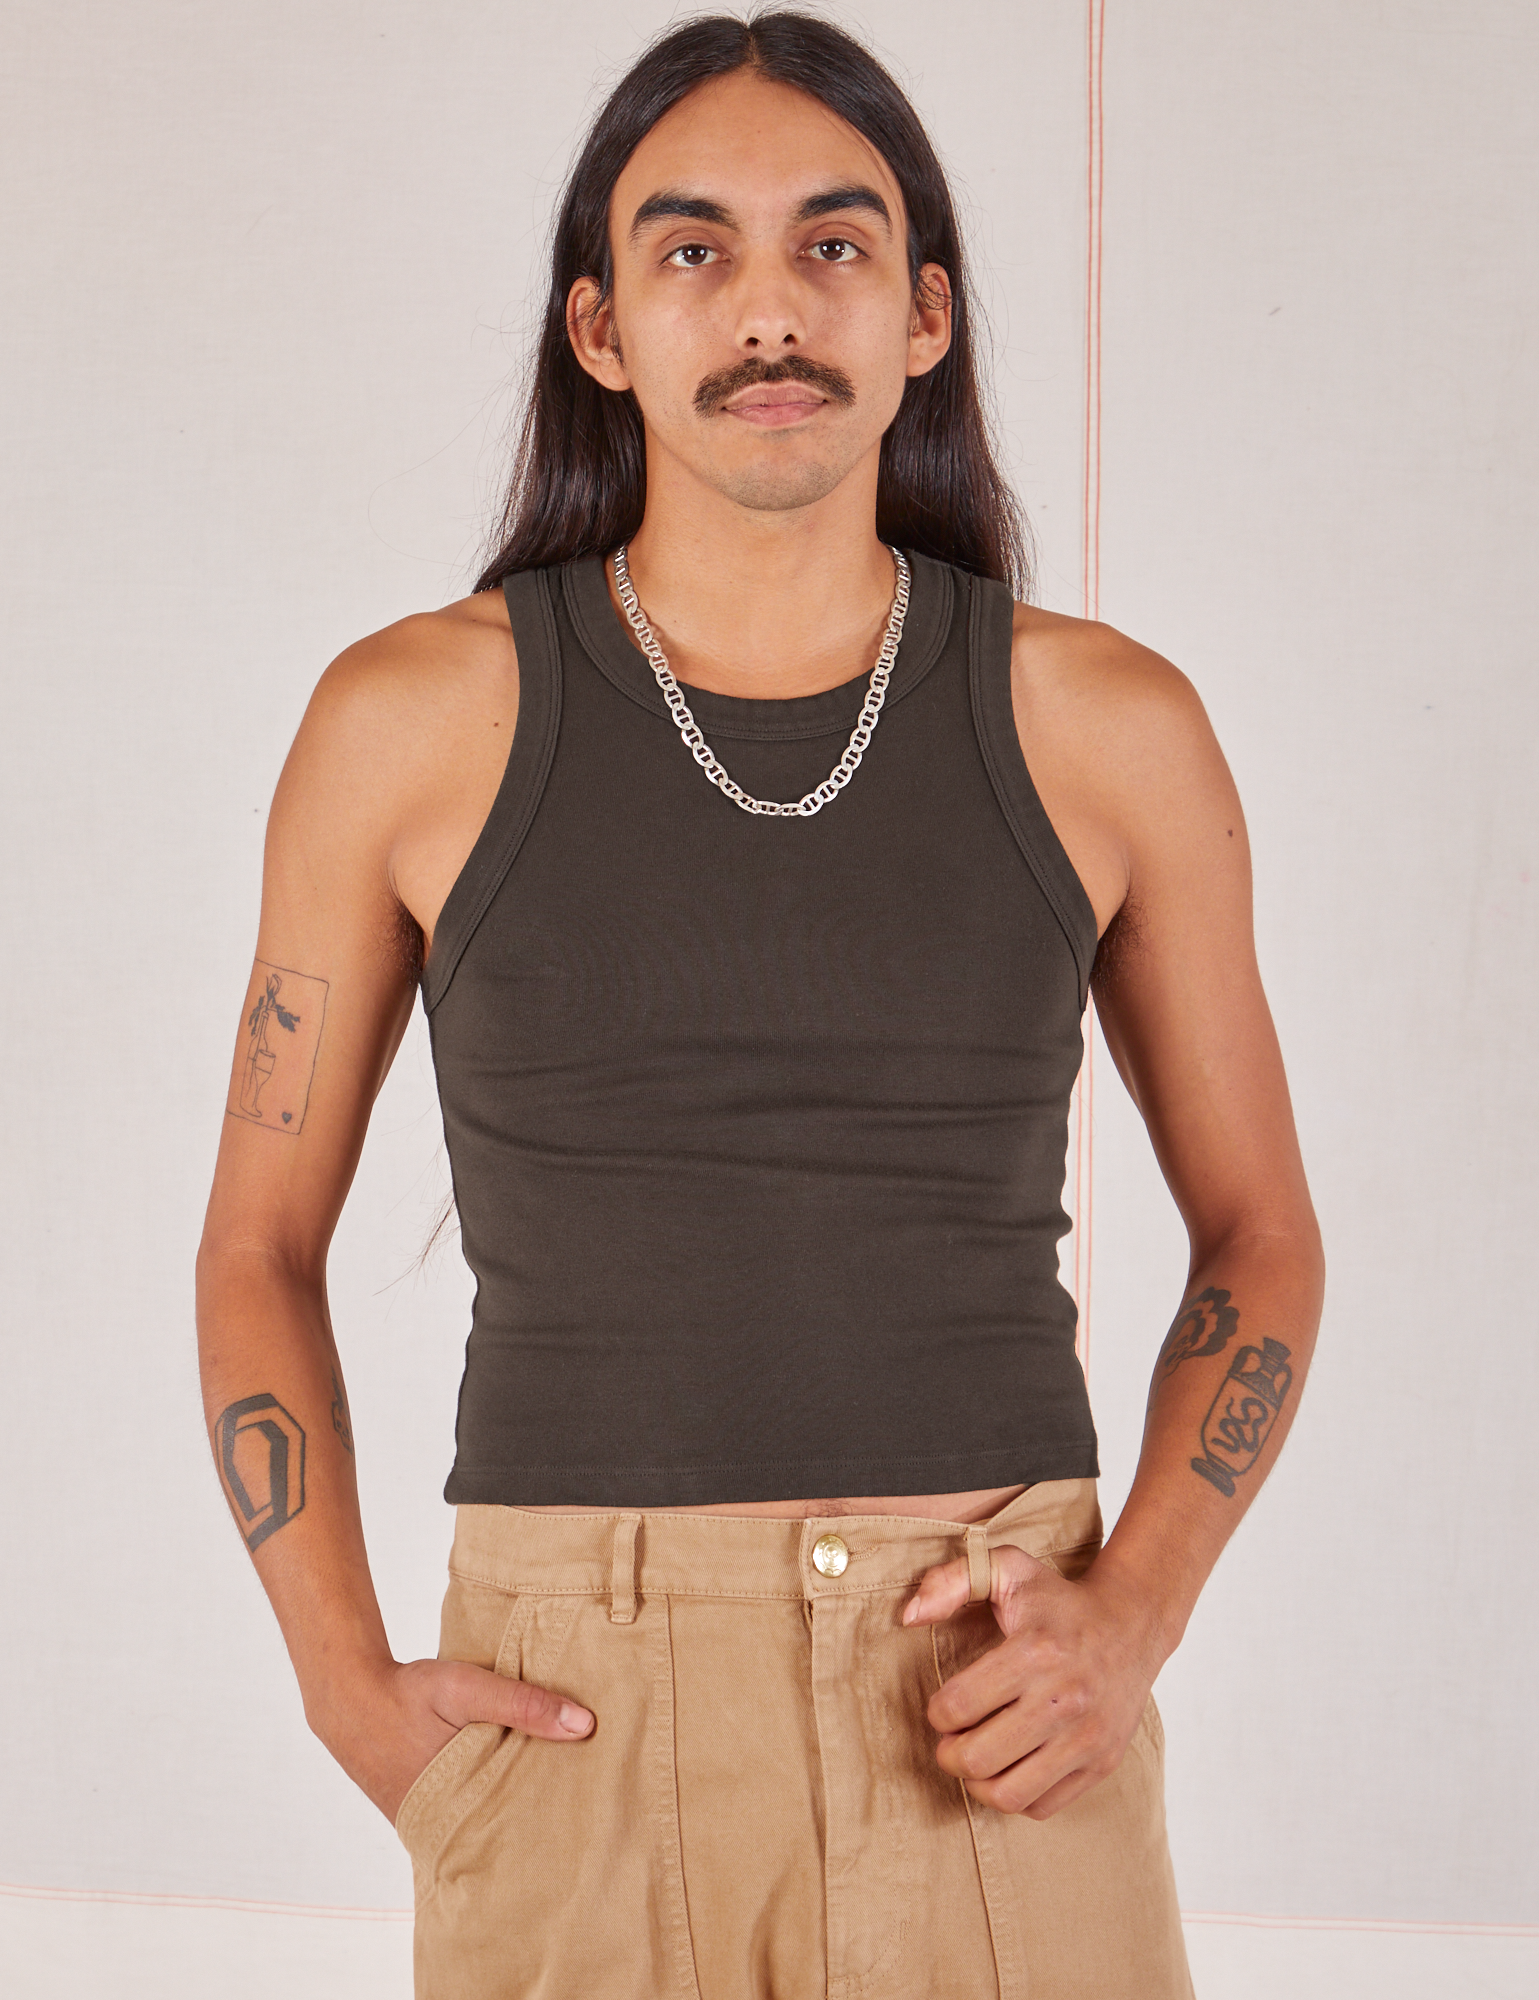 Anthony is 5’10” and wearing S Racerback Tank in Espresso Brown